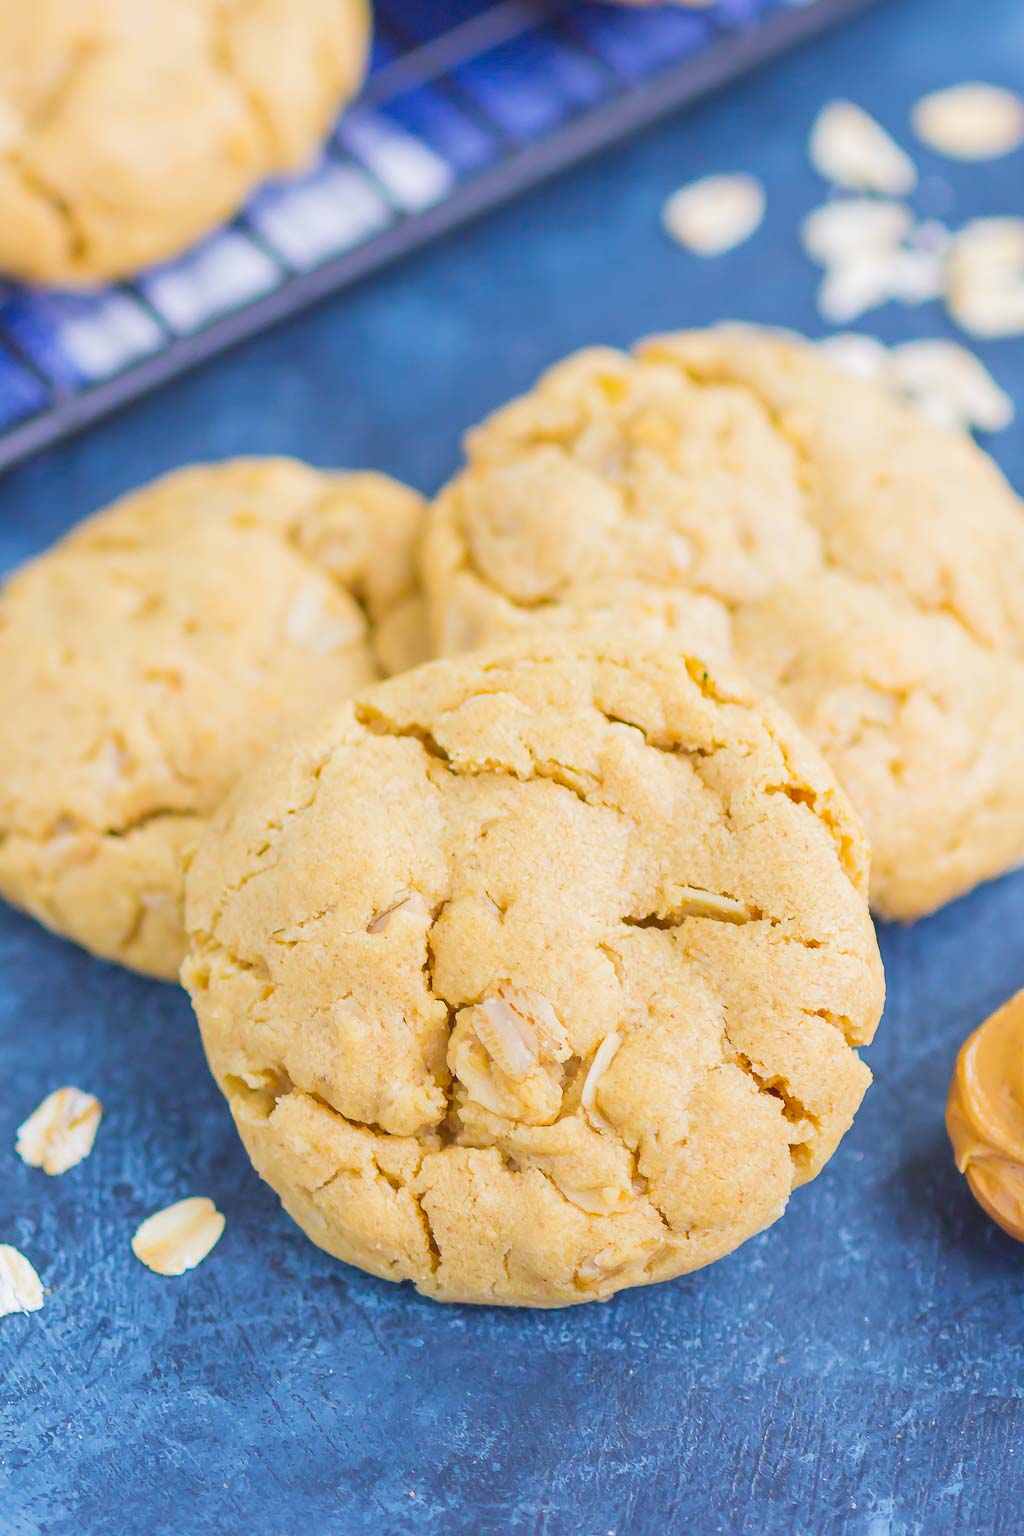 Peanut Butter Oatmeal Cookies are soft, chewy, and loaded with flavor. This easy cookie recipe is ready in no time and perfect for peanut butter lovers! #cookies #peanutbuttercookies #peanutbutteroatmealcookies #bestpeanutbuttercookies #easycookierecipe #dessert